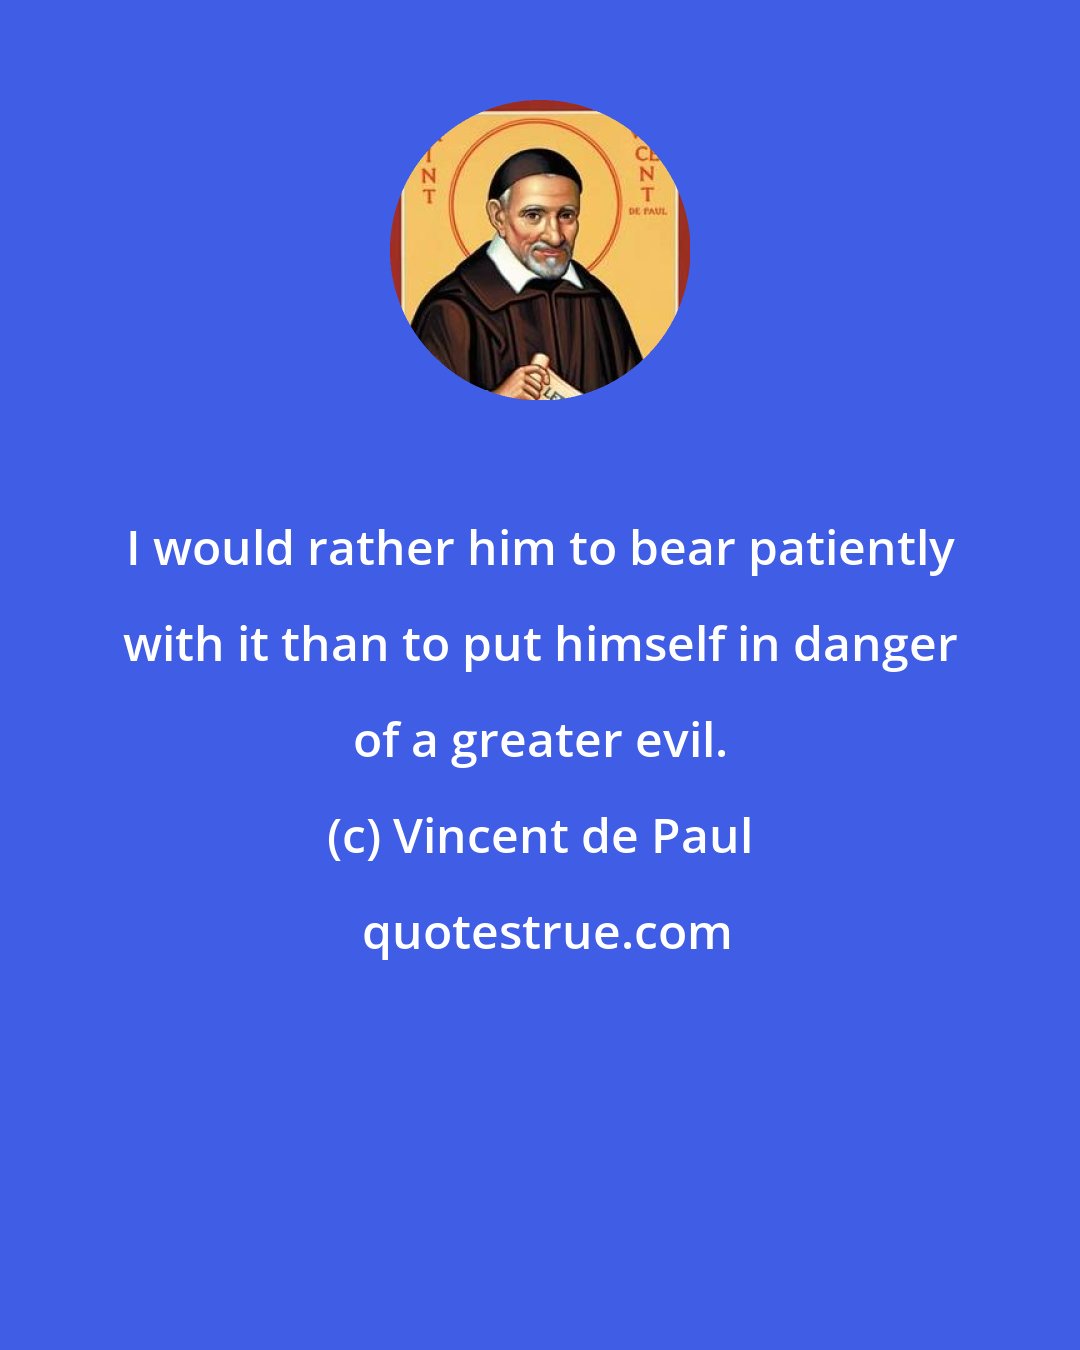 Vincent de Paul: I would rather him to bear patiently with it than to put himself in danger of a greater evil.